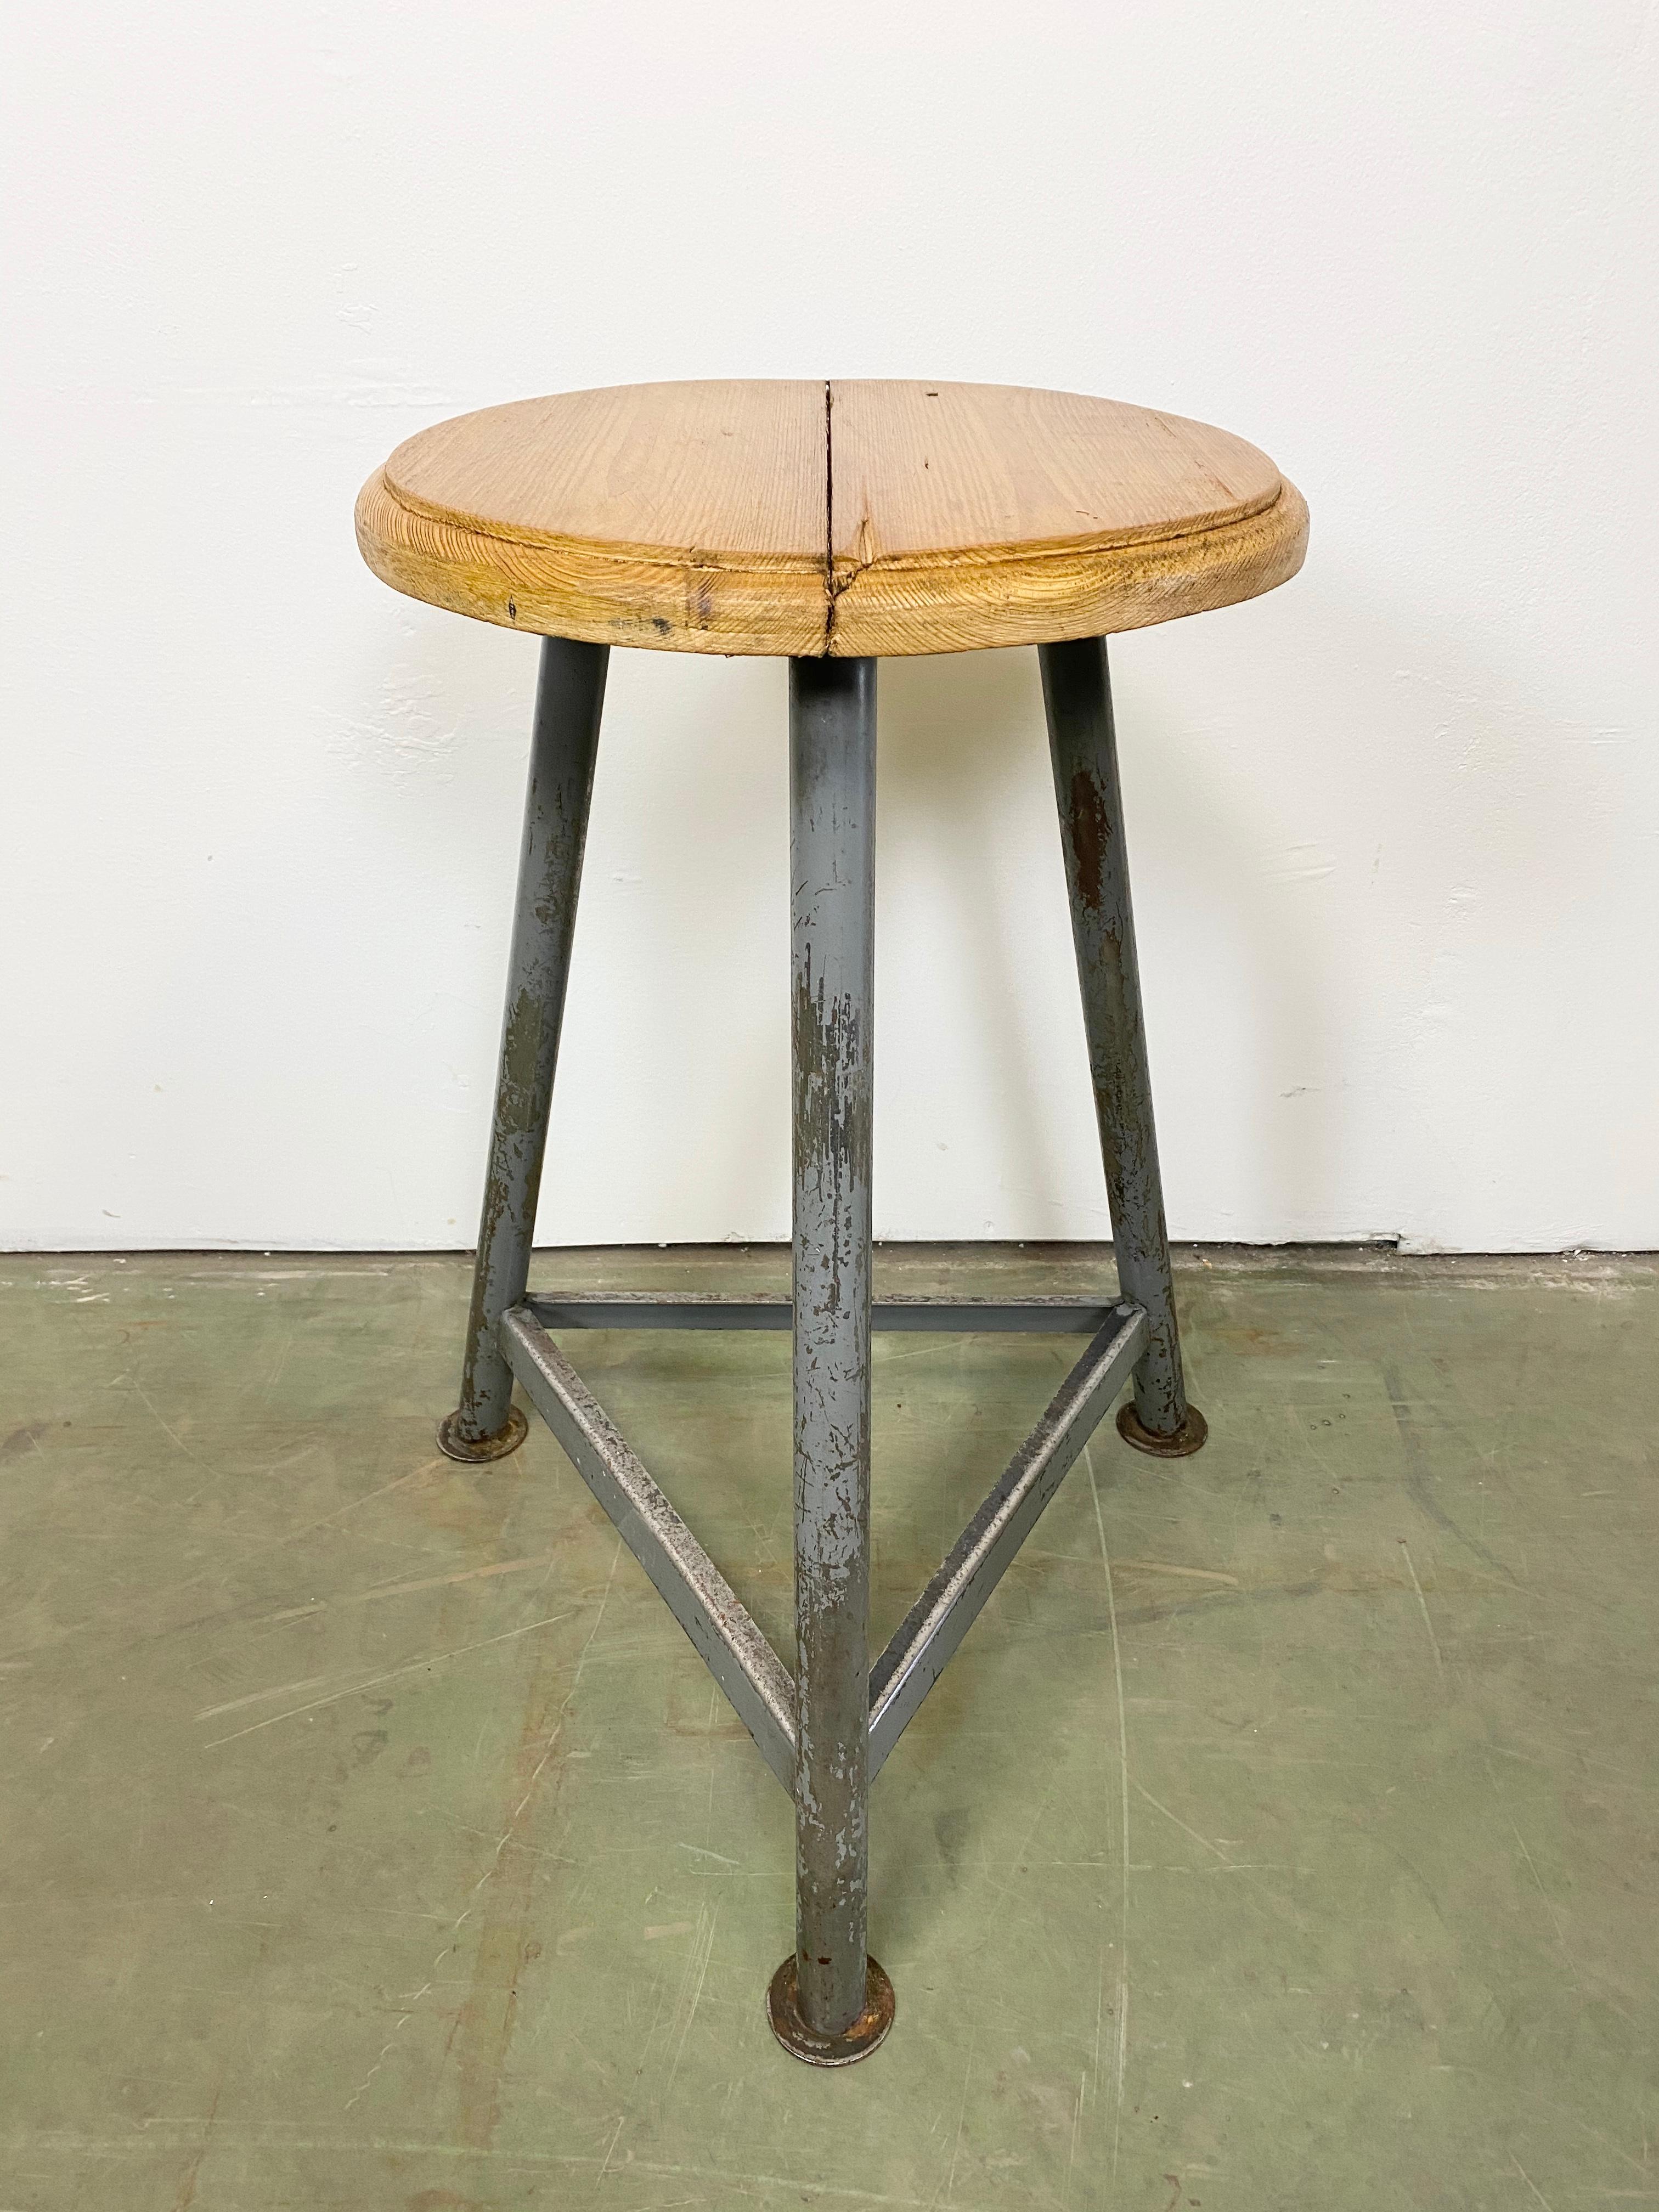 Industrial stool with a wooden seat and grey metal frame.
The weight of the stool is 5 kg.